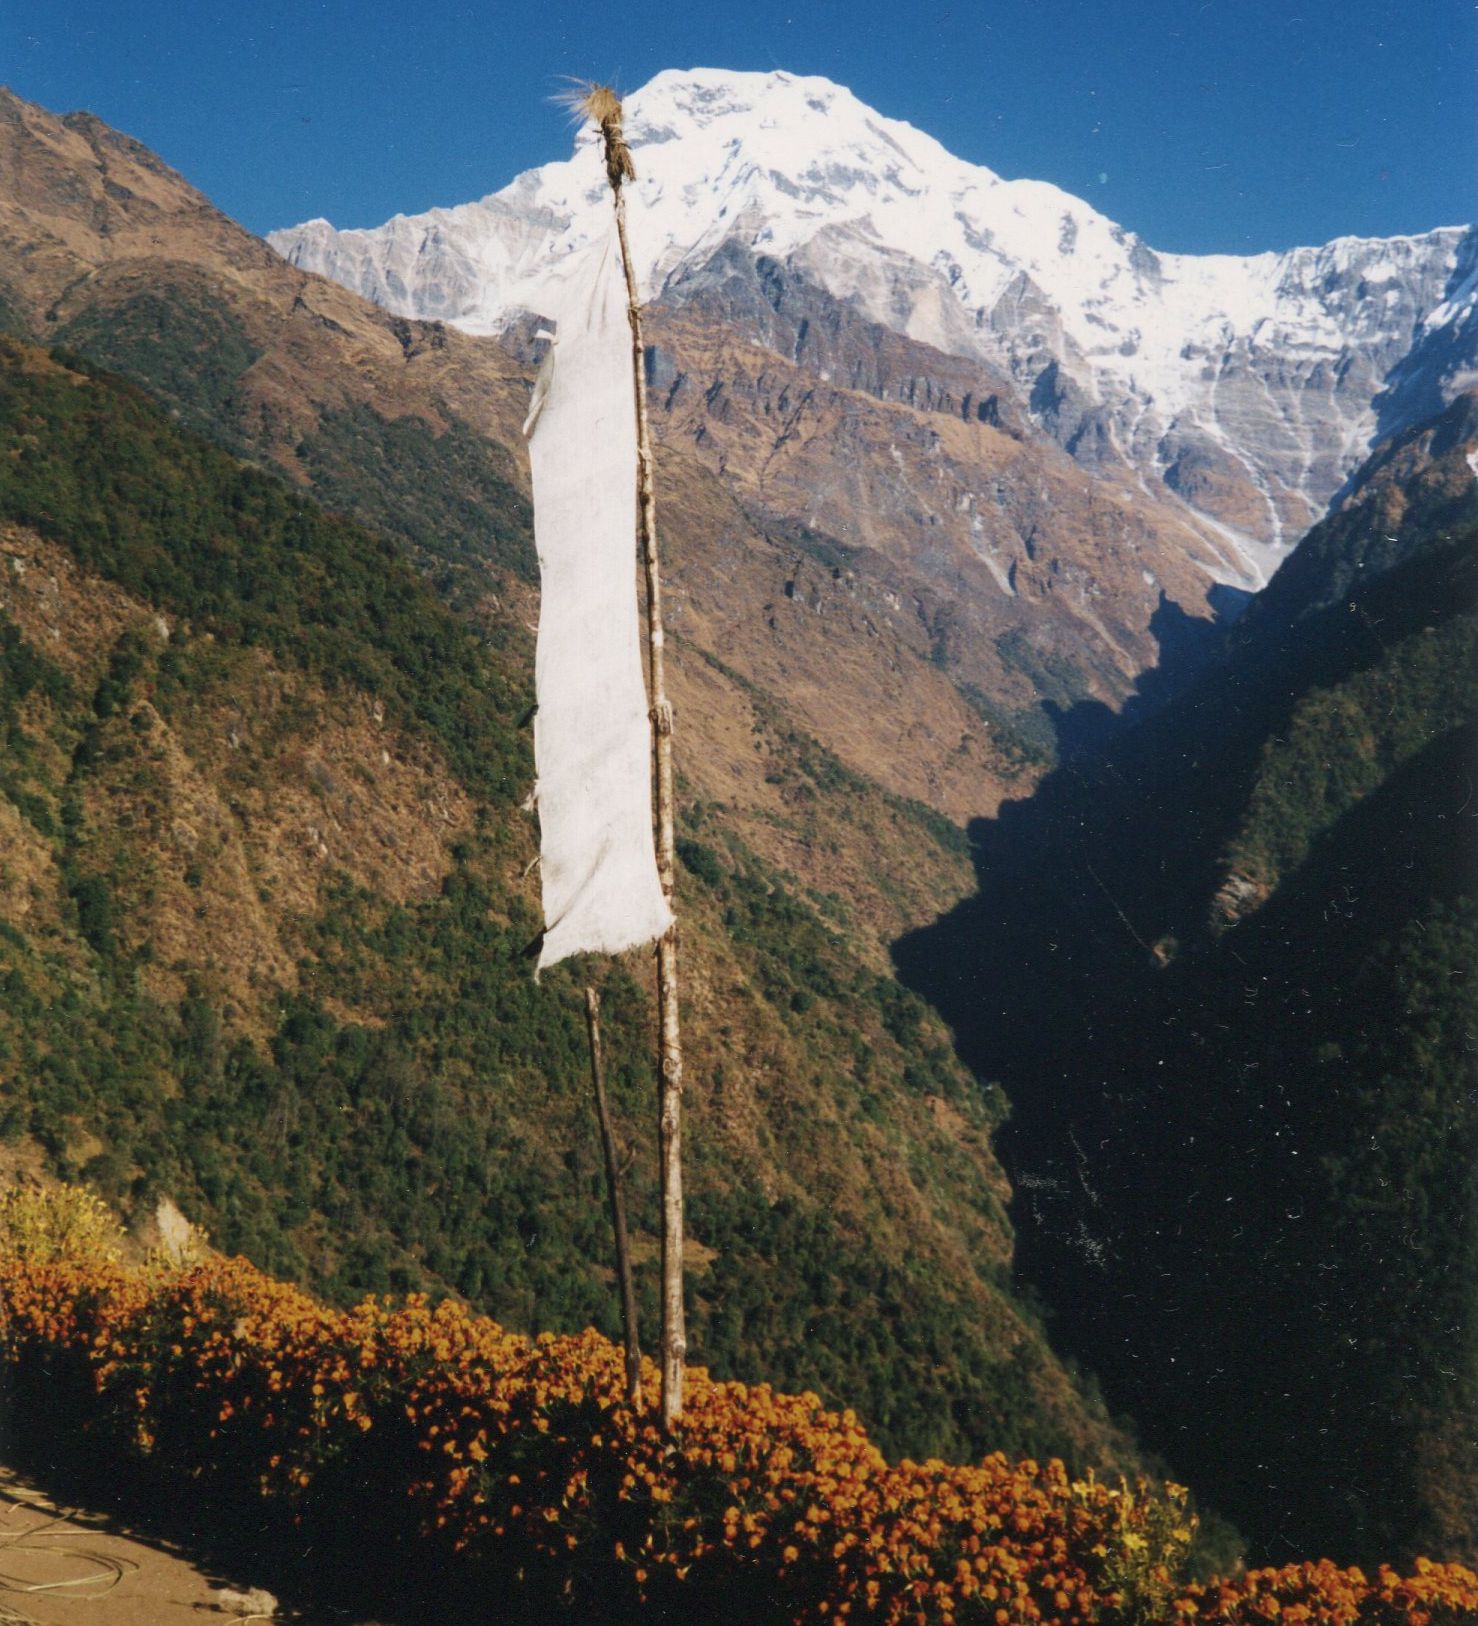 Annapurna South and Hiunchuli from Chomrong